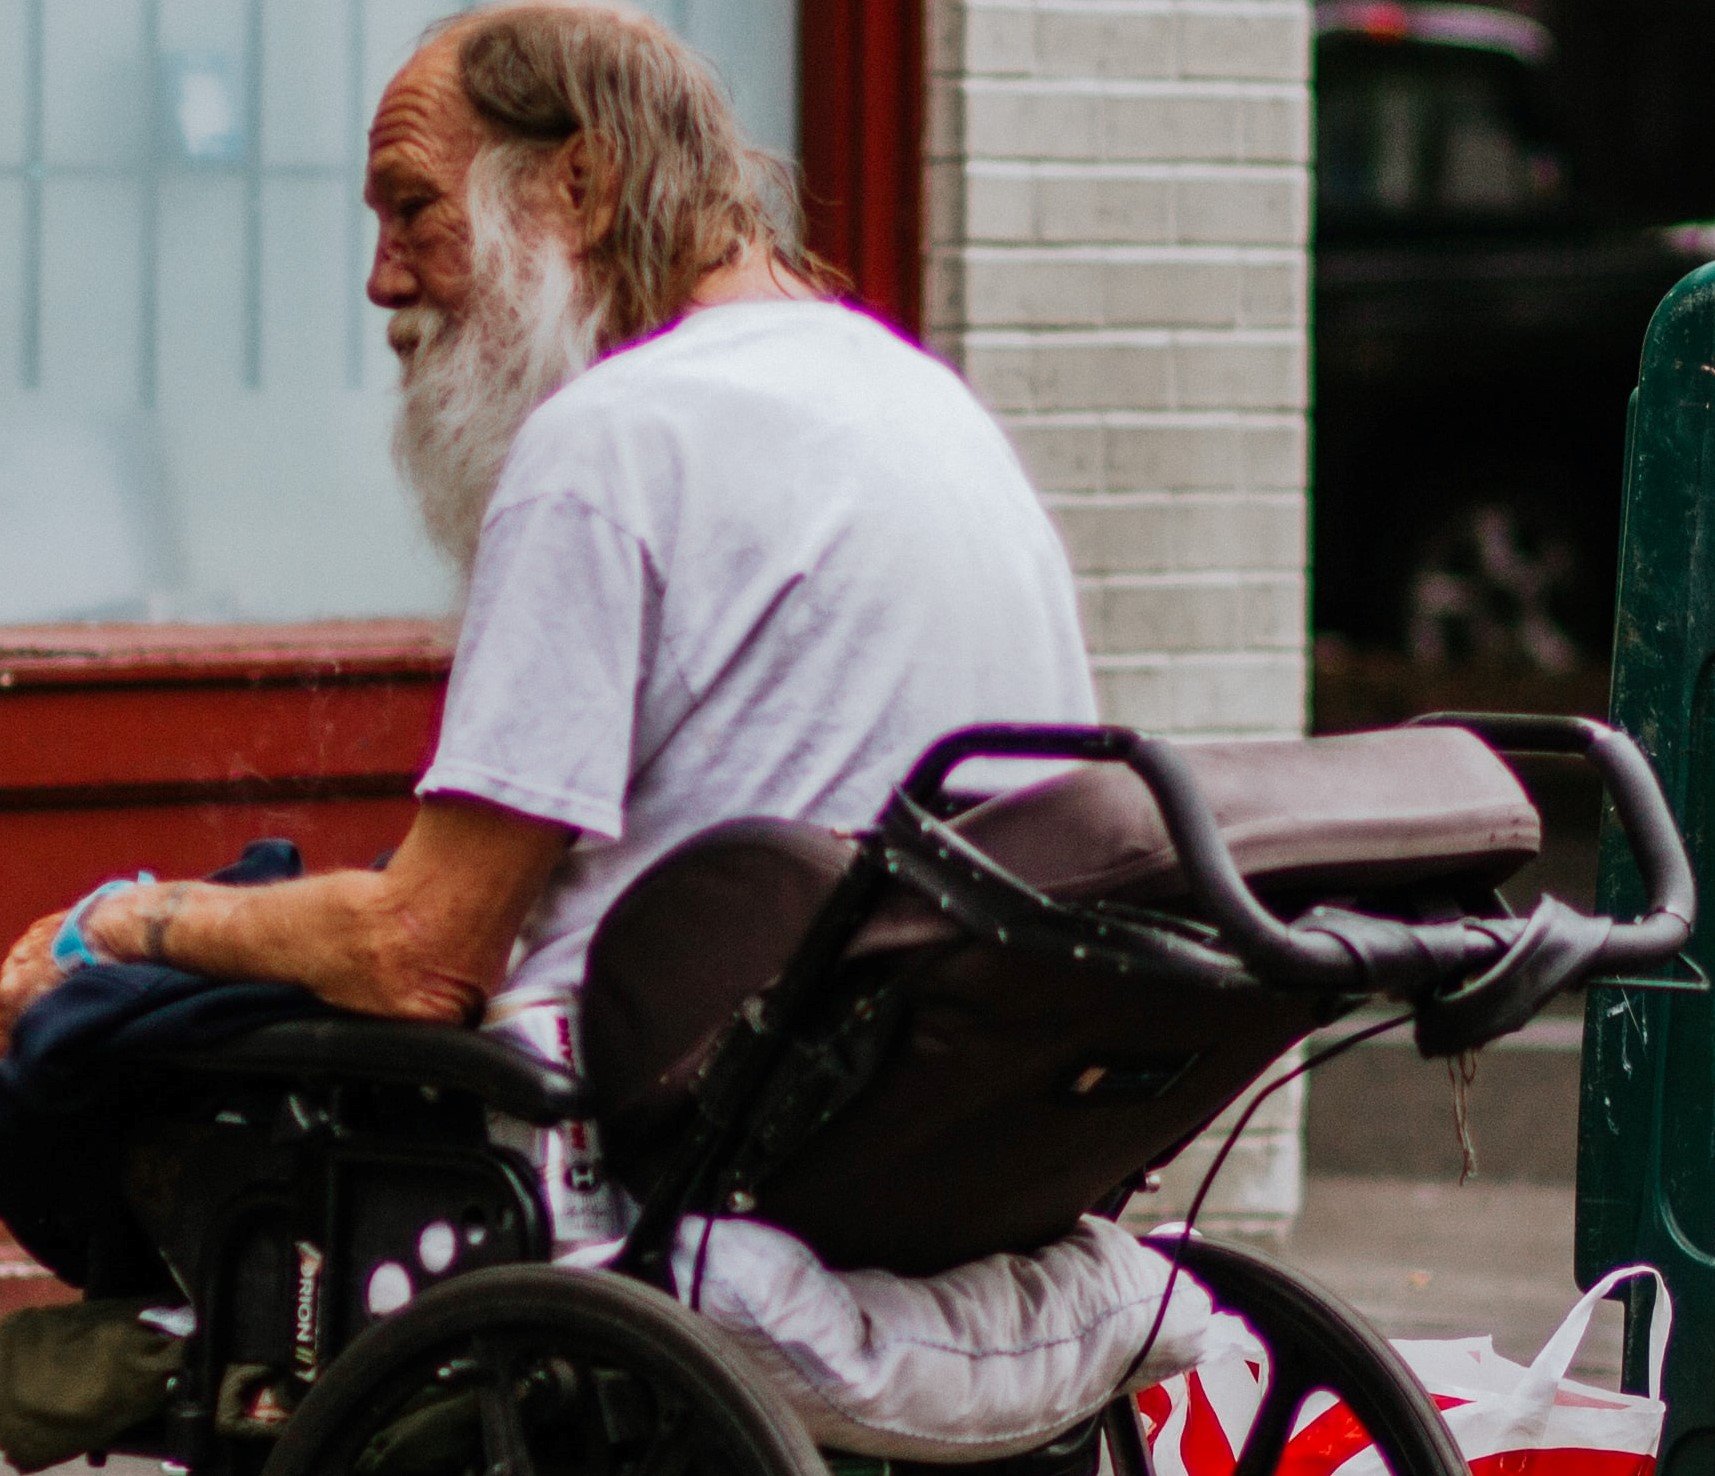 The old man never placed an order & seemed lost. | Source: Pexels